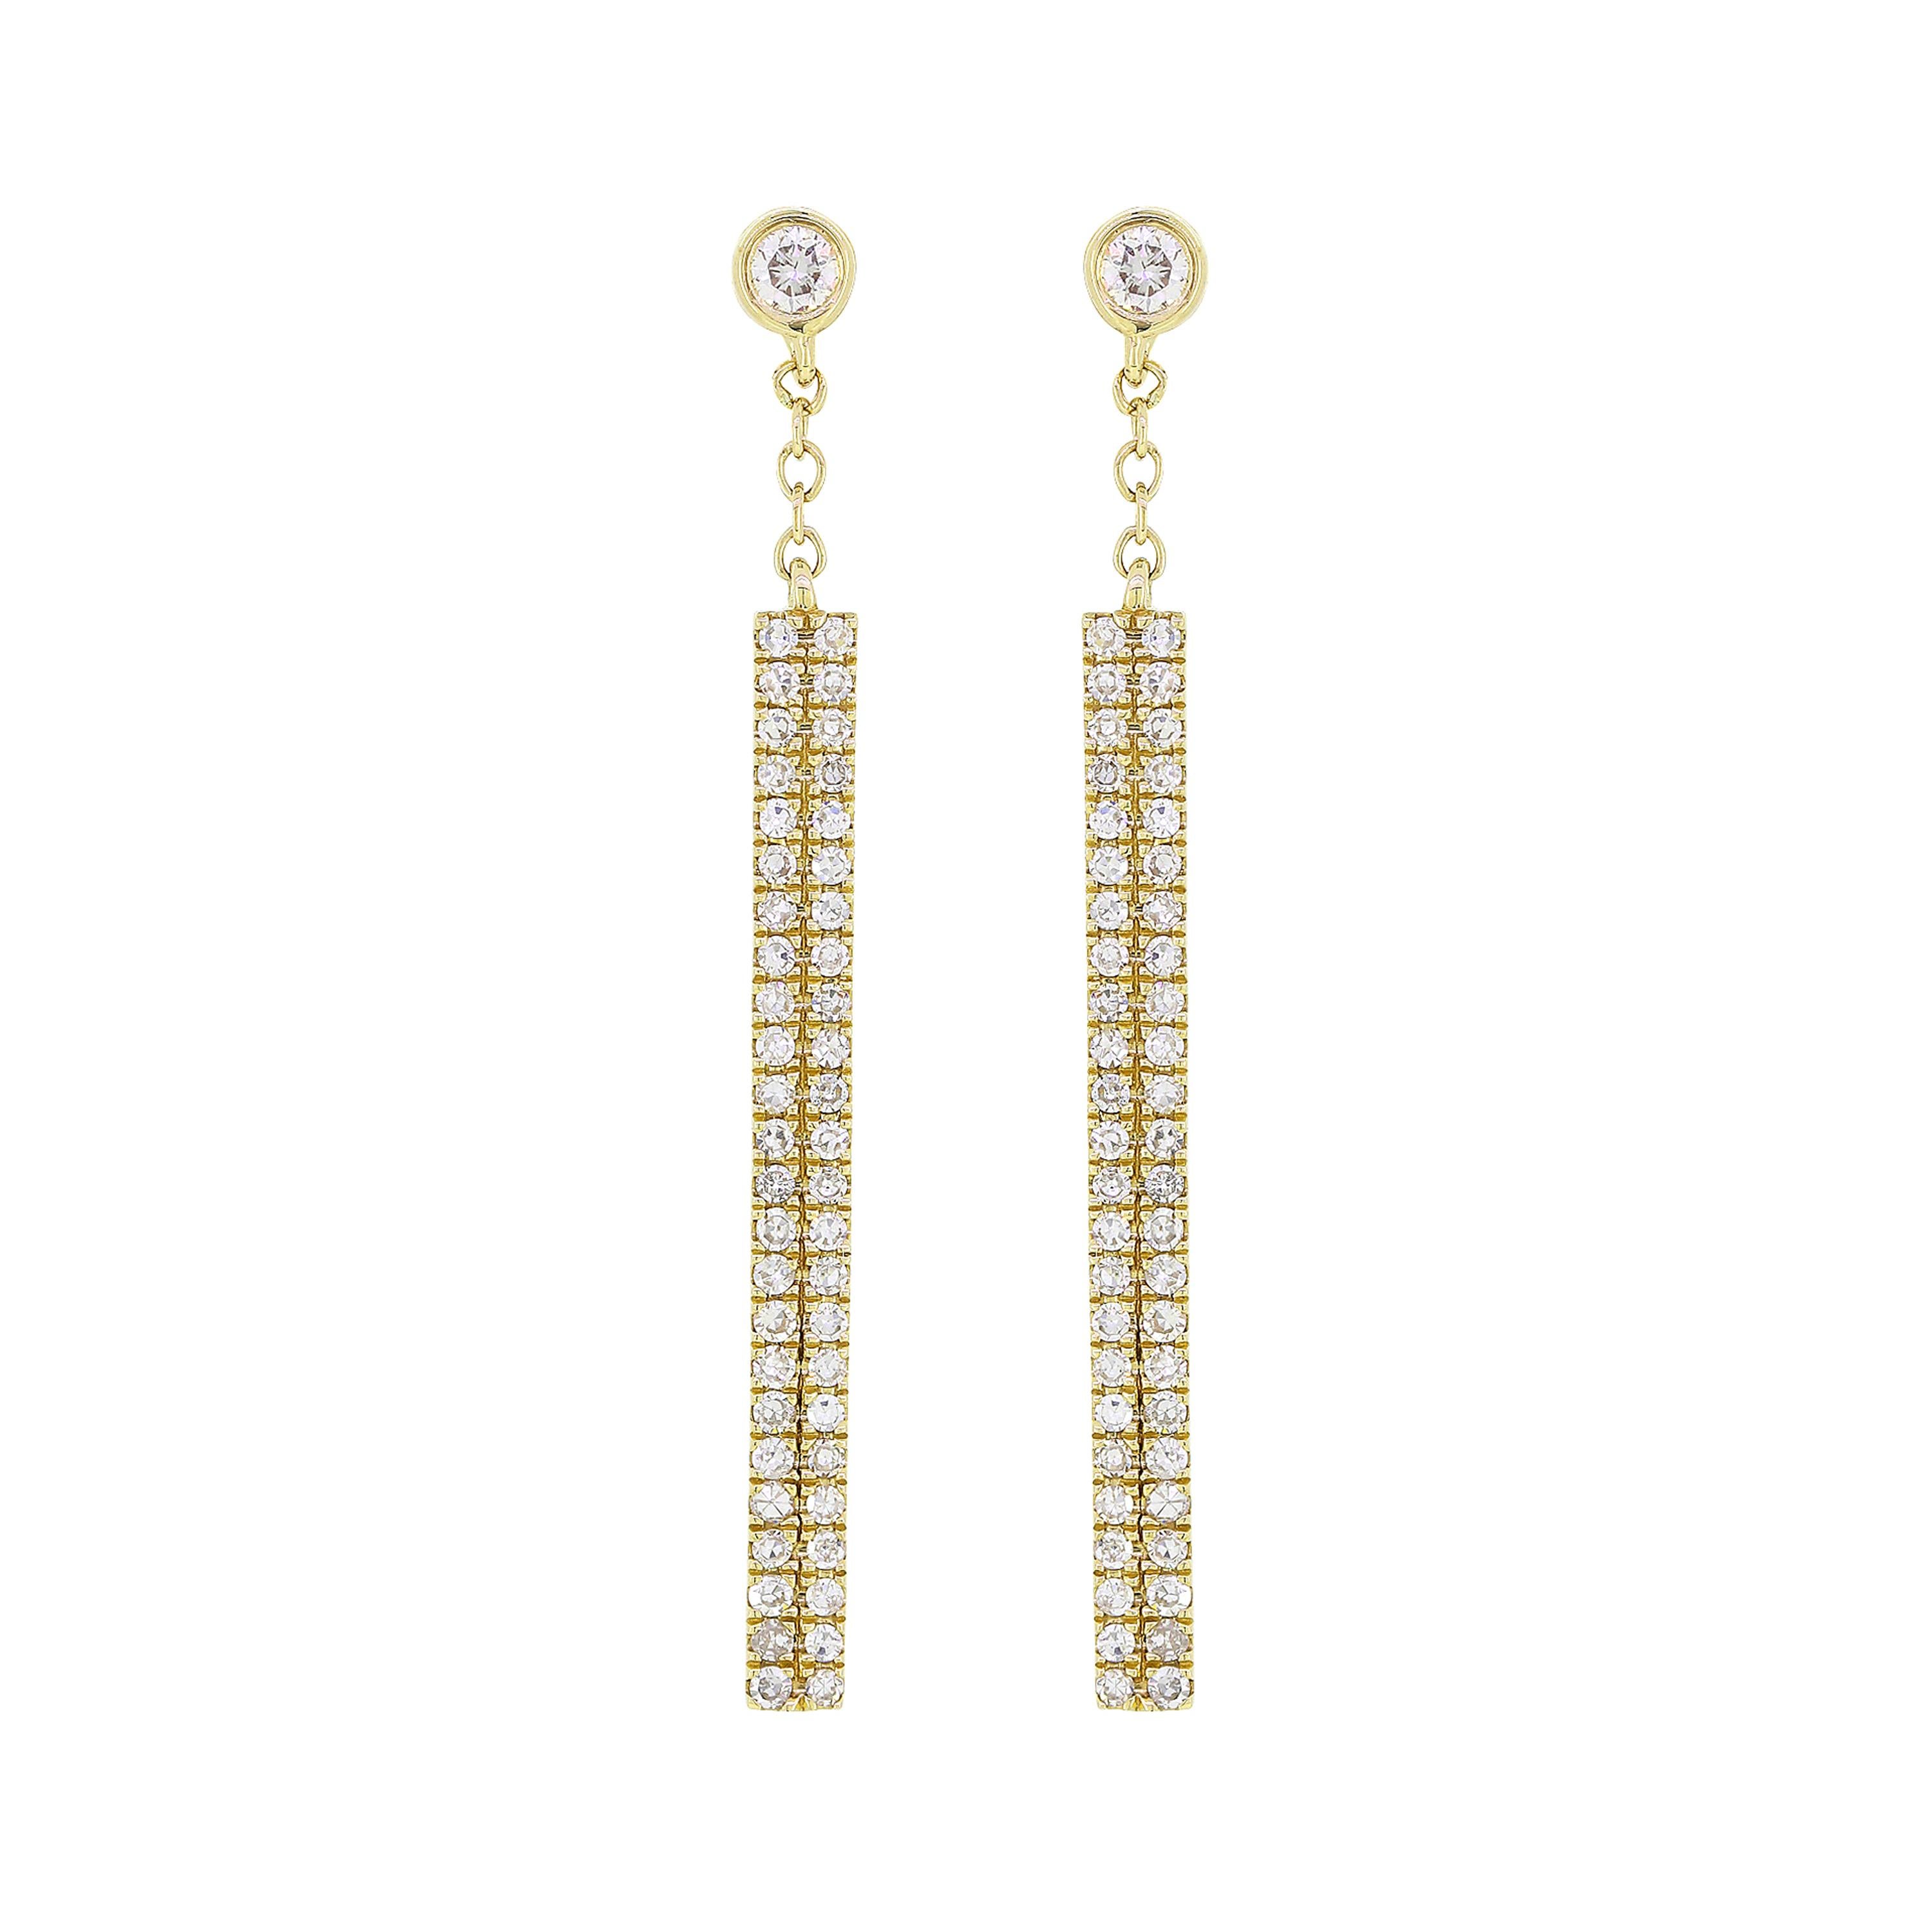 Rectangular drop earrings featured with 2 bezel set diamonds and 96 pave diamonds. The earrings come with gold posts and clutch backs.
Approx. Metal Weight: 2.22 gram
Approx. Diamond Weight: 0.31 Cts
Diamond Shape/Cut: Round
Diamond Color: